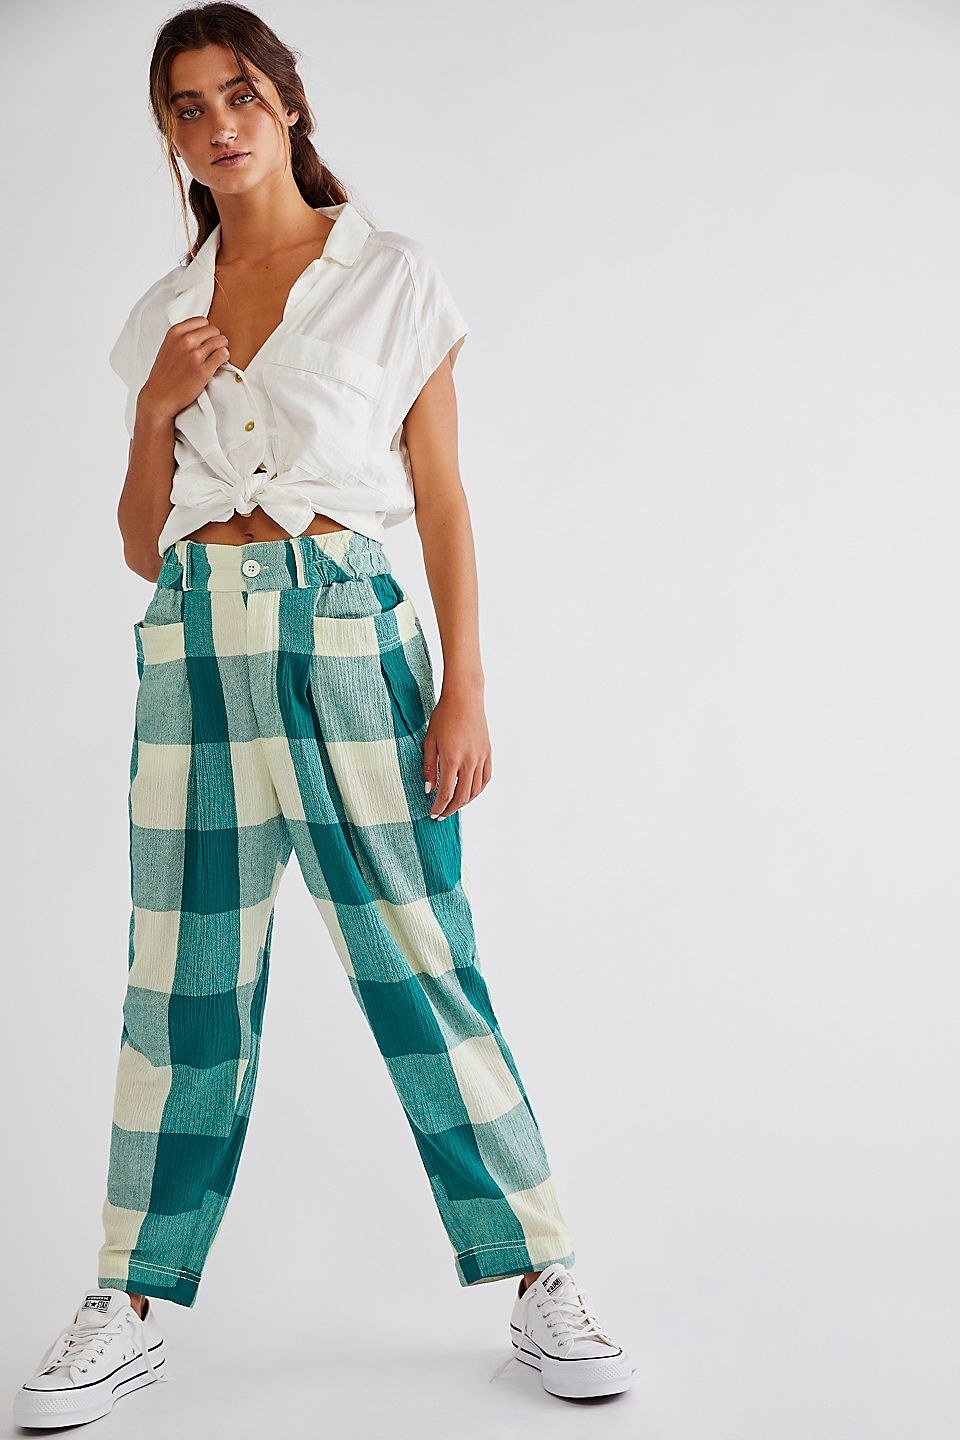 model wearing the trousers in teal and white plaid